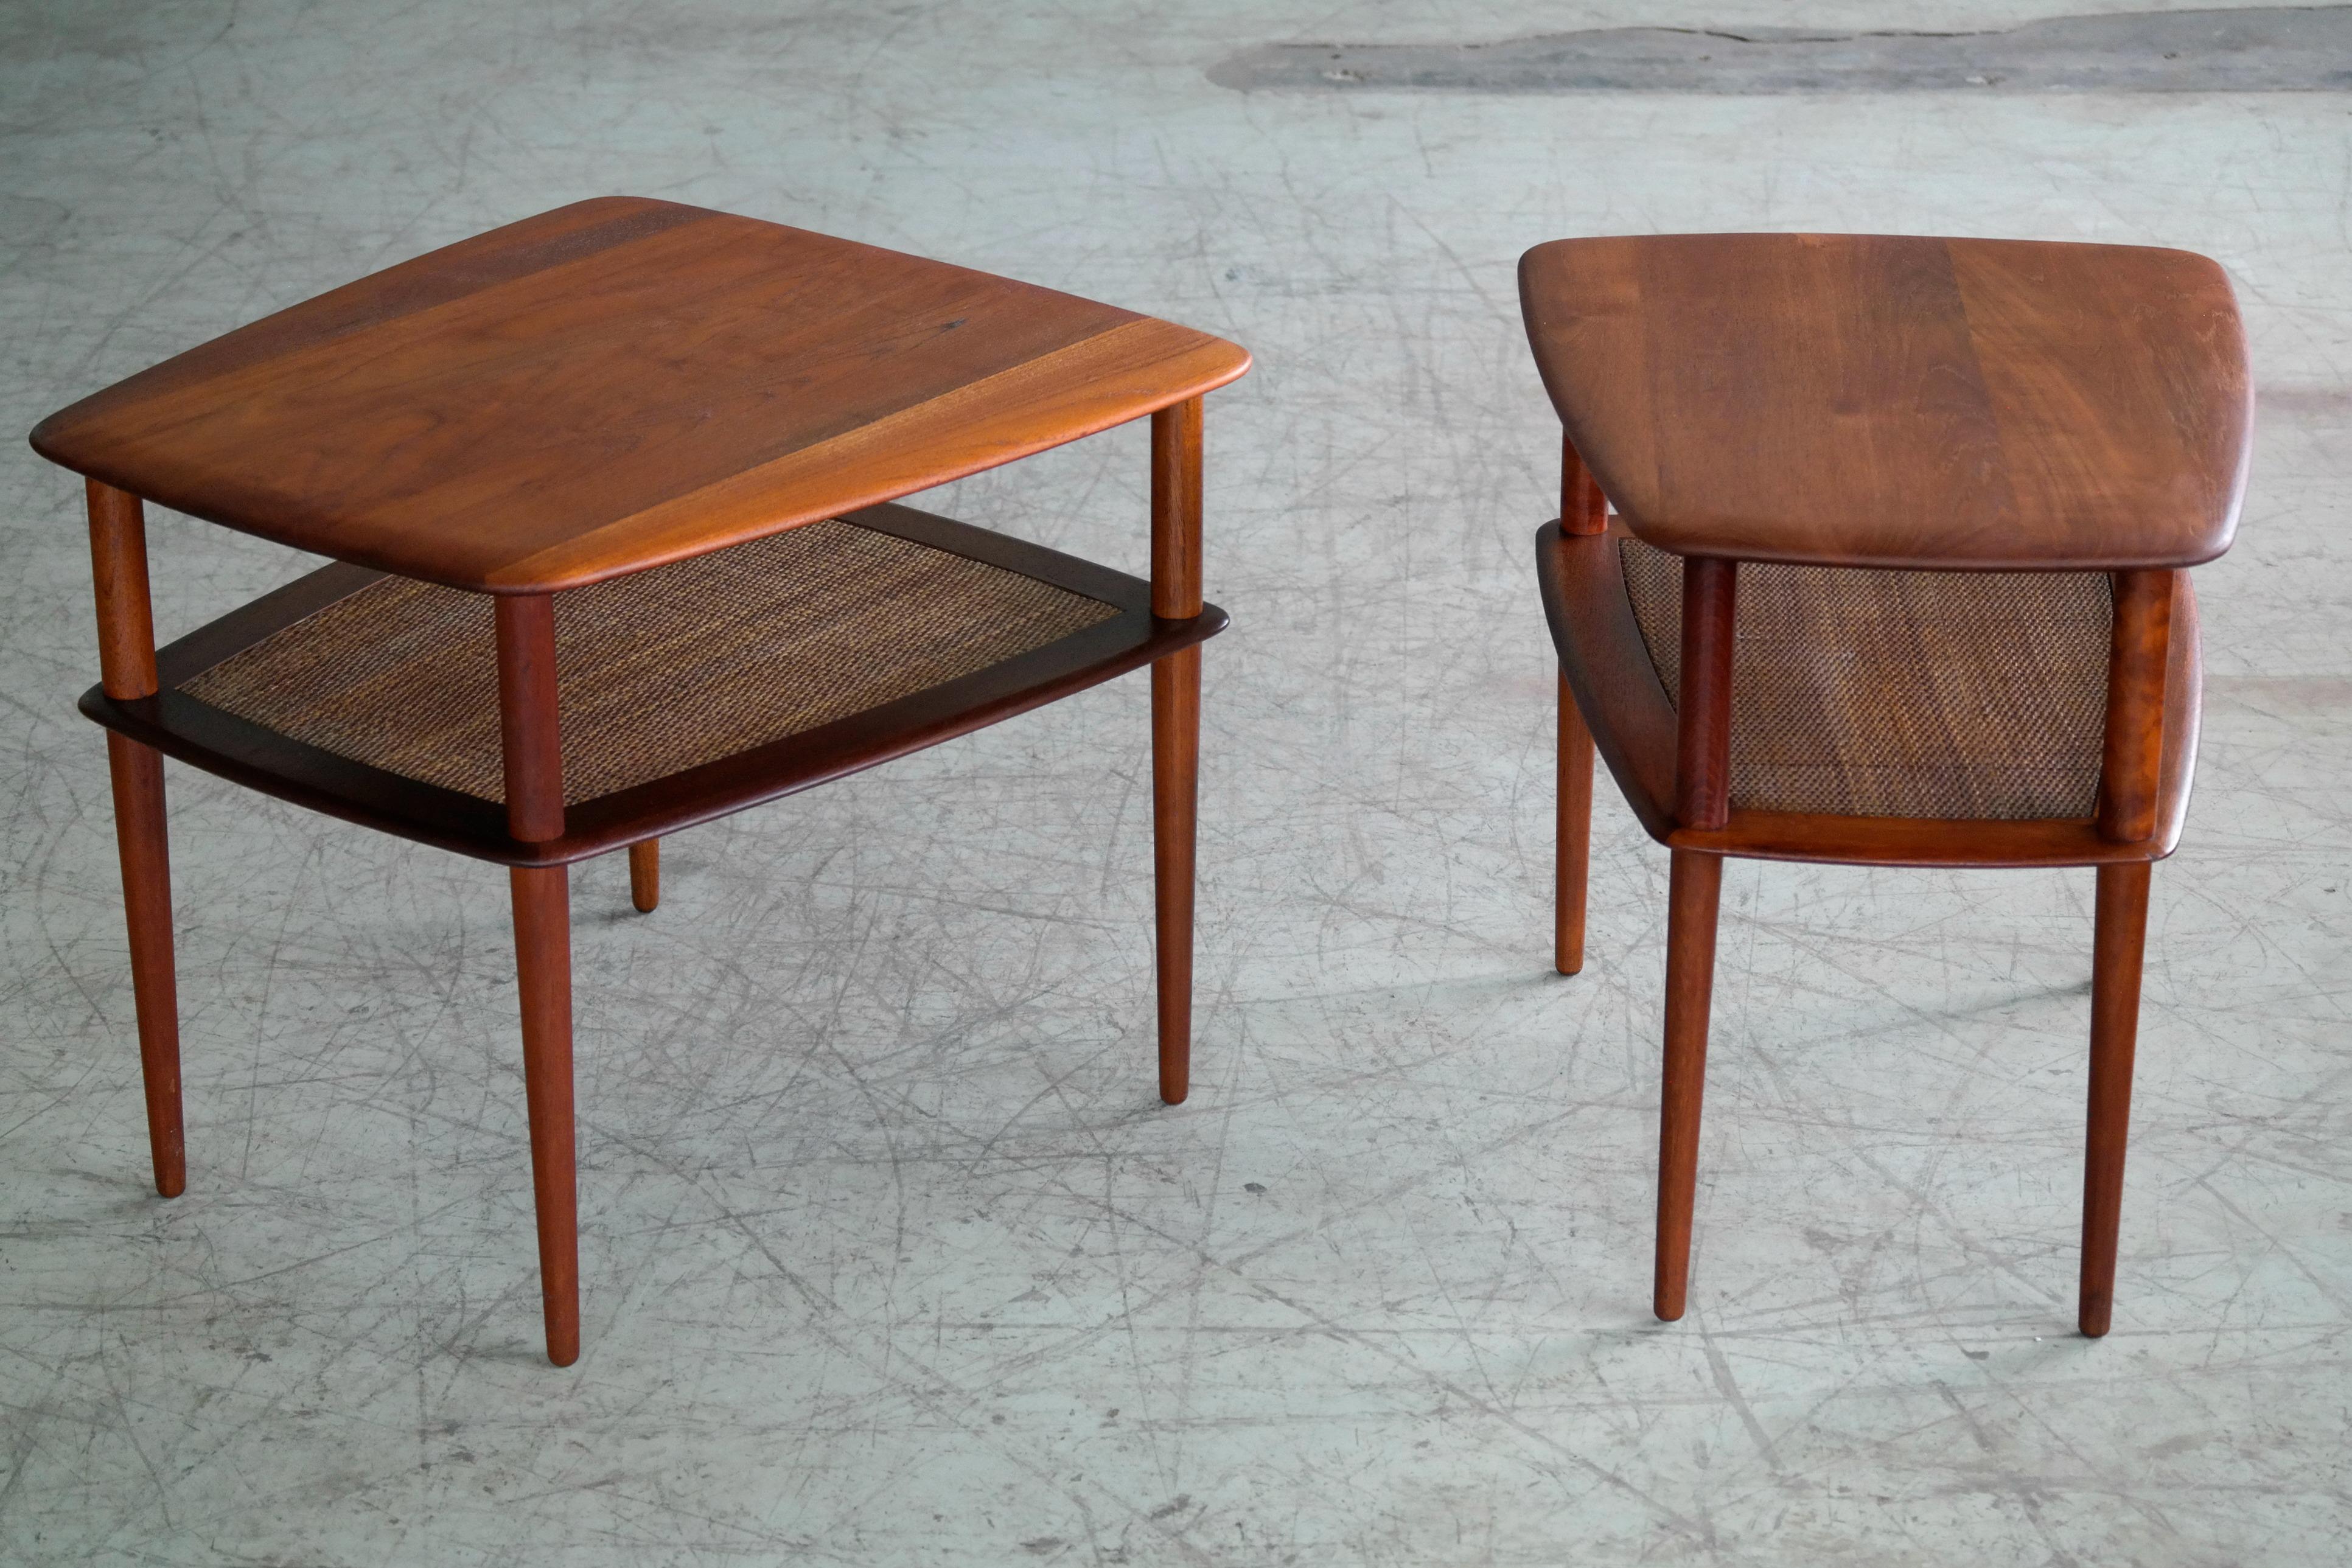 Fantastic pair of very hard to find teak Danish Modern end tables designed by Peter Hvidt for France and Son. Crafted in solid teak with a woven cane magazine shelf under tabletop raised on slim conical legs. One table is slightly narrower in the